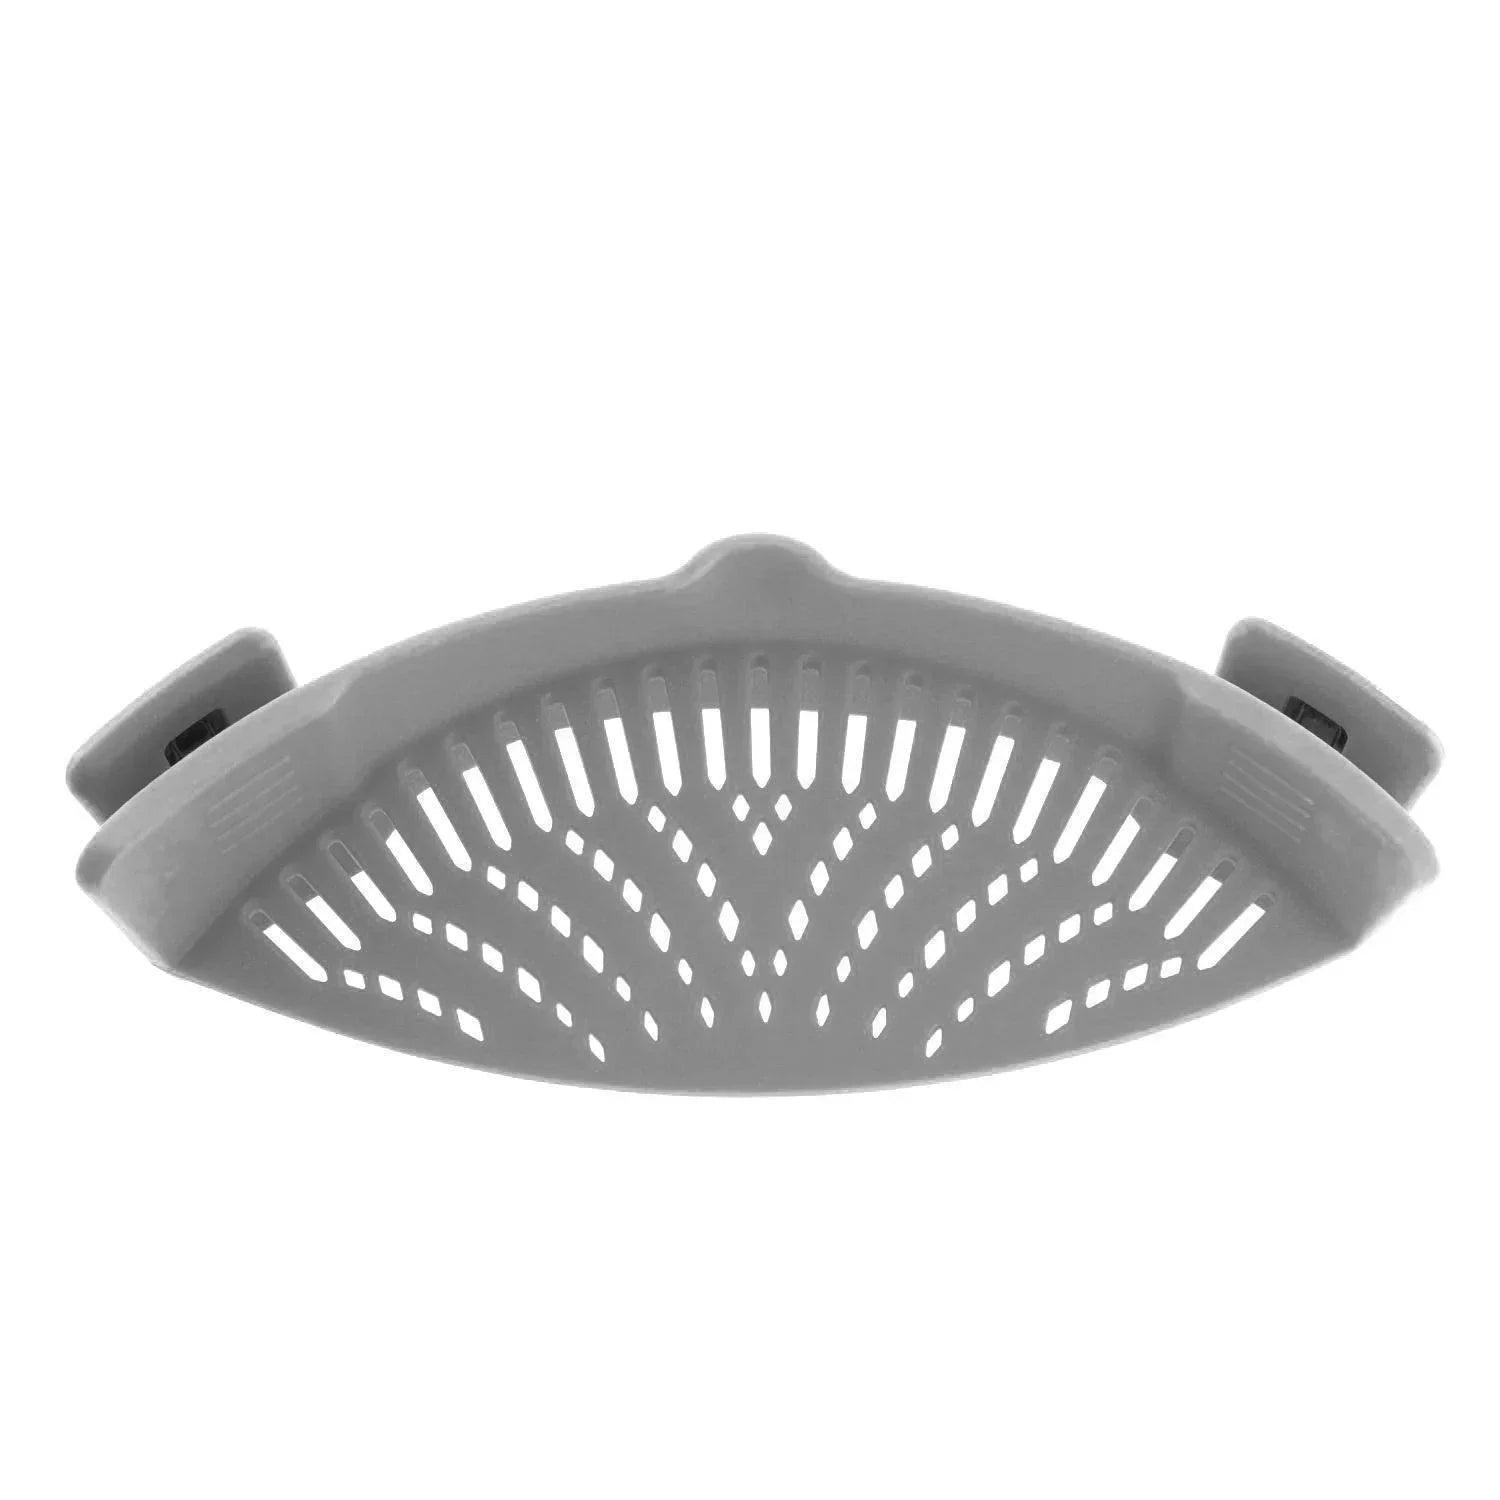 https://www.lilydepot.com/cdn/shop/files/clip-on-strainer-silicone-for-all-pots-and-pans-meat-vegetables-fruit-silicone-kitchen-colander-lily-depot-4.webp?v=1704178866&width=1920